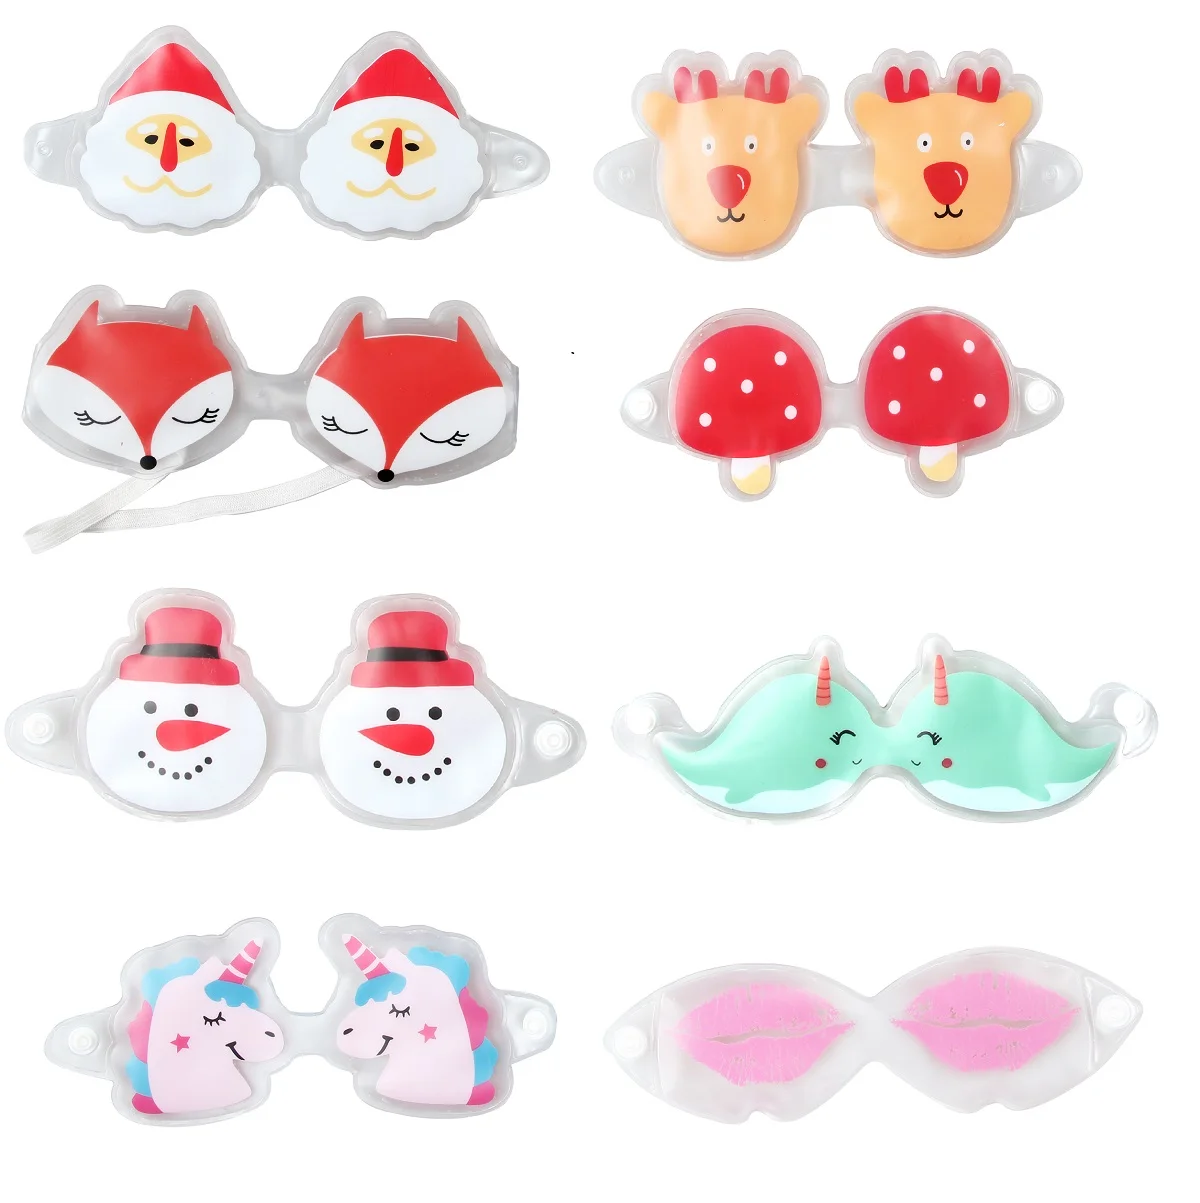 

Cartoon Cooling Eye Mask Reusable Beads Hot Cold Eye Mask for Therapy Soothing Visual Fatigue Remove Dark Circles Gel Eye Mask